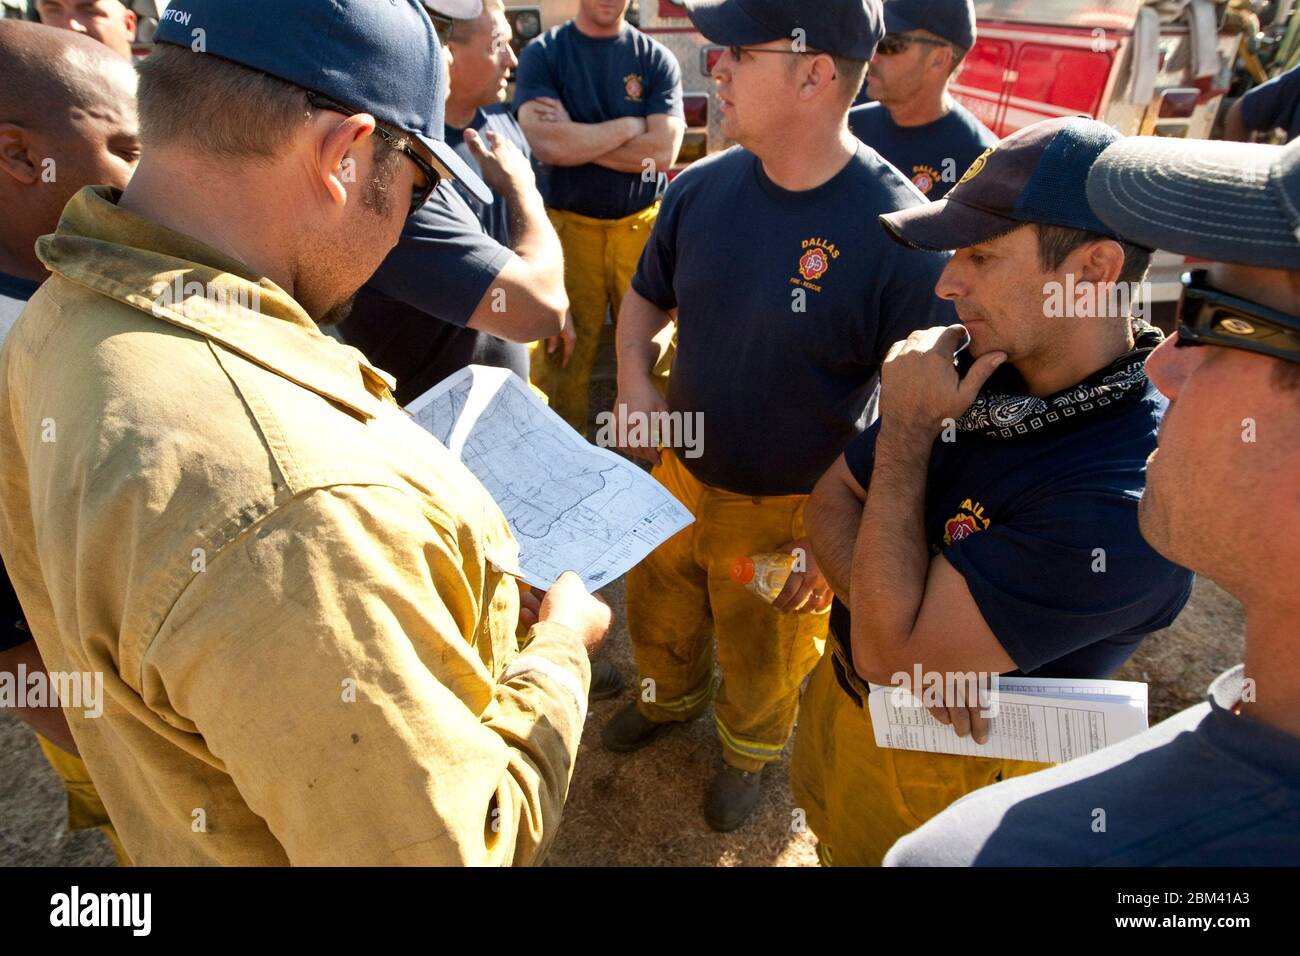 Bastrop, Texas USA, September 9, 2011: Firefighters from Dallas, Texas, gather outside the Bastrop Convention Center before being sent out to rural areas that were struck by massive wildfires in early September. Firefighters from around the state came to the aid of overwhelmed local officials. ©Marjorie Kamys Cotera/Daemmrich Photography Stock Photo